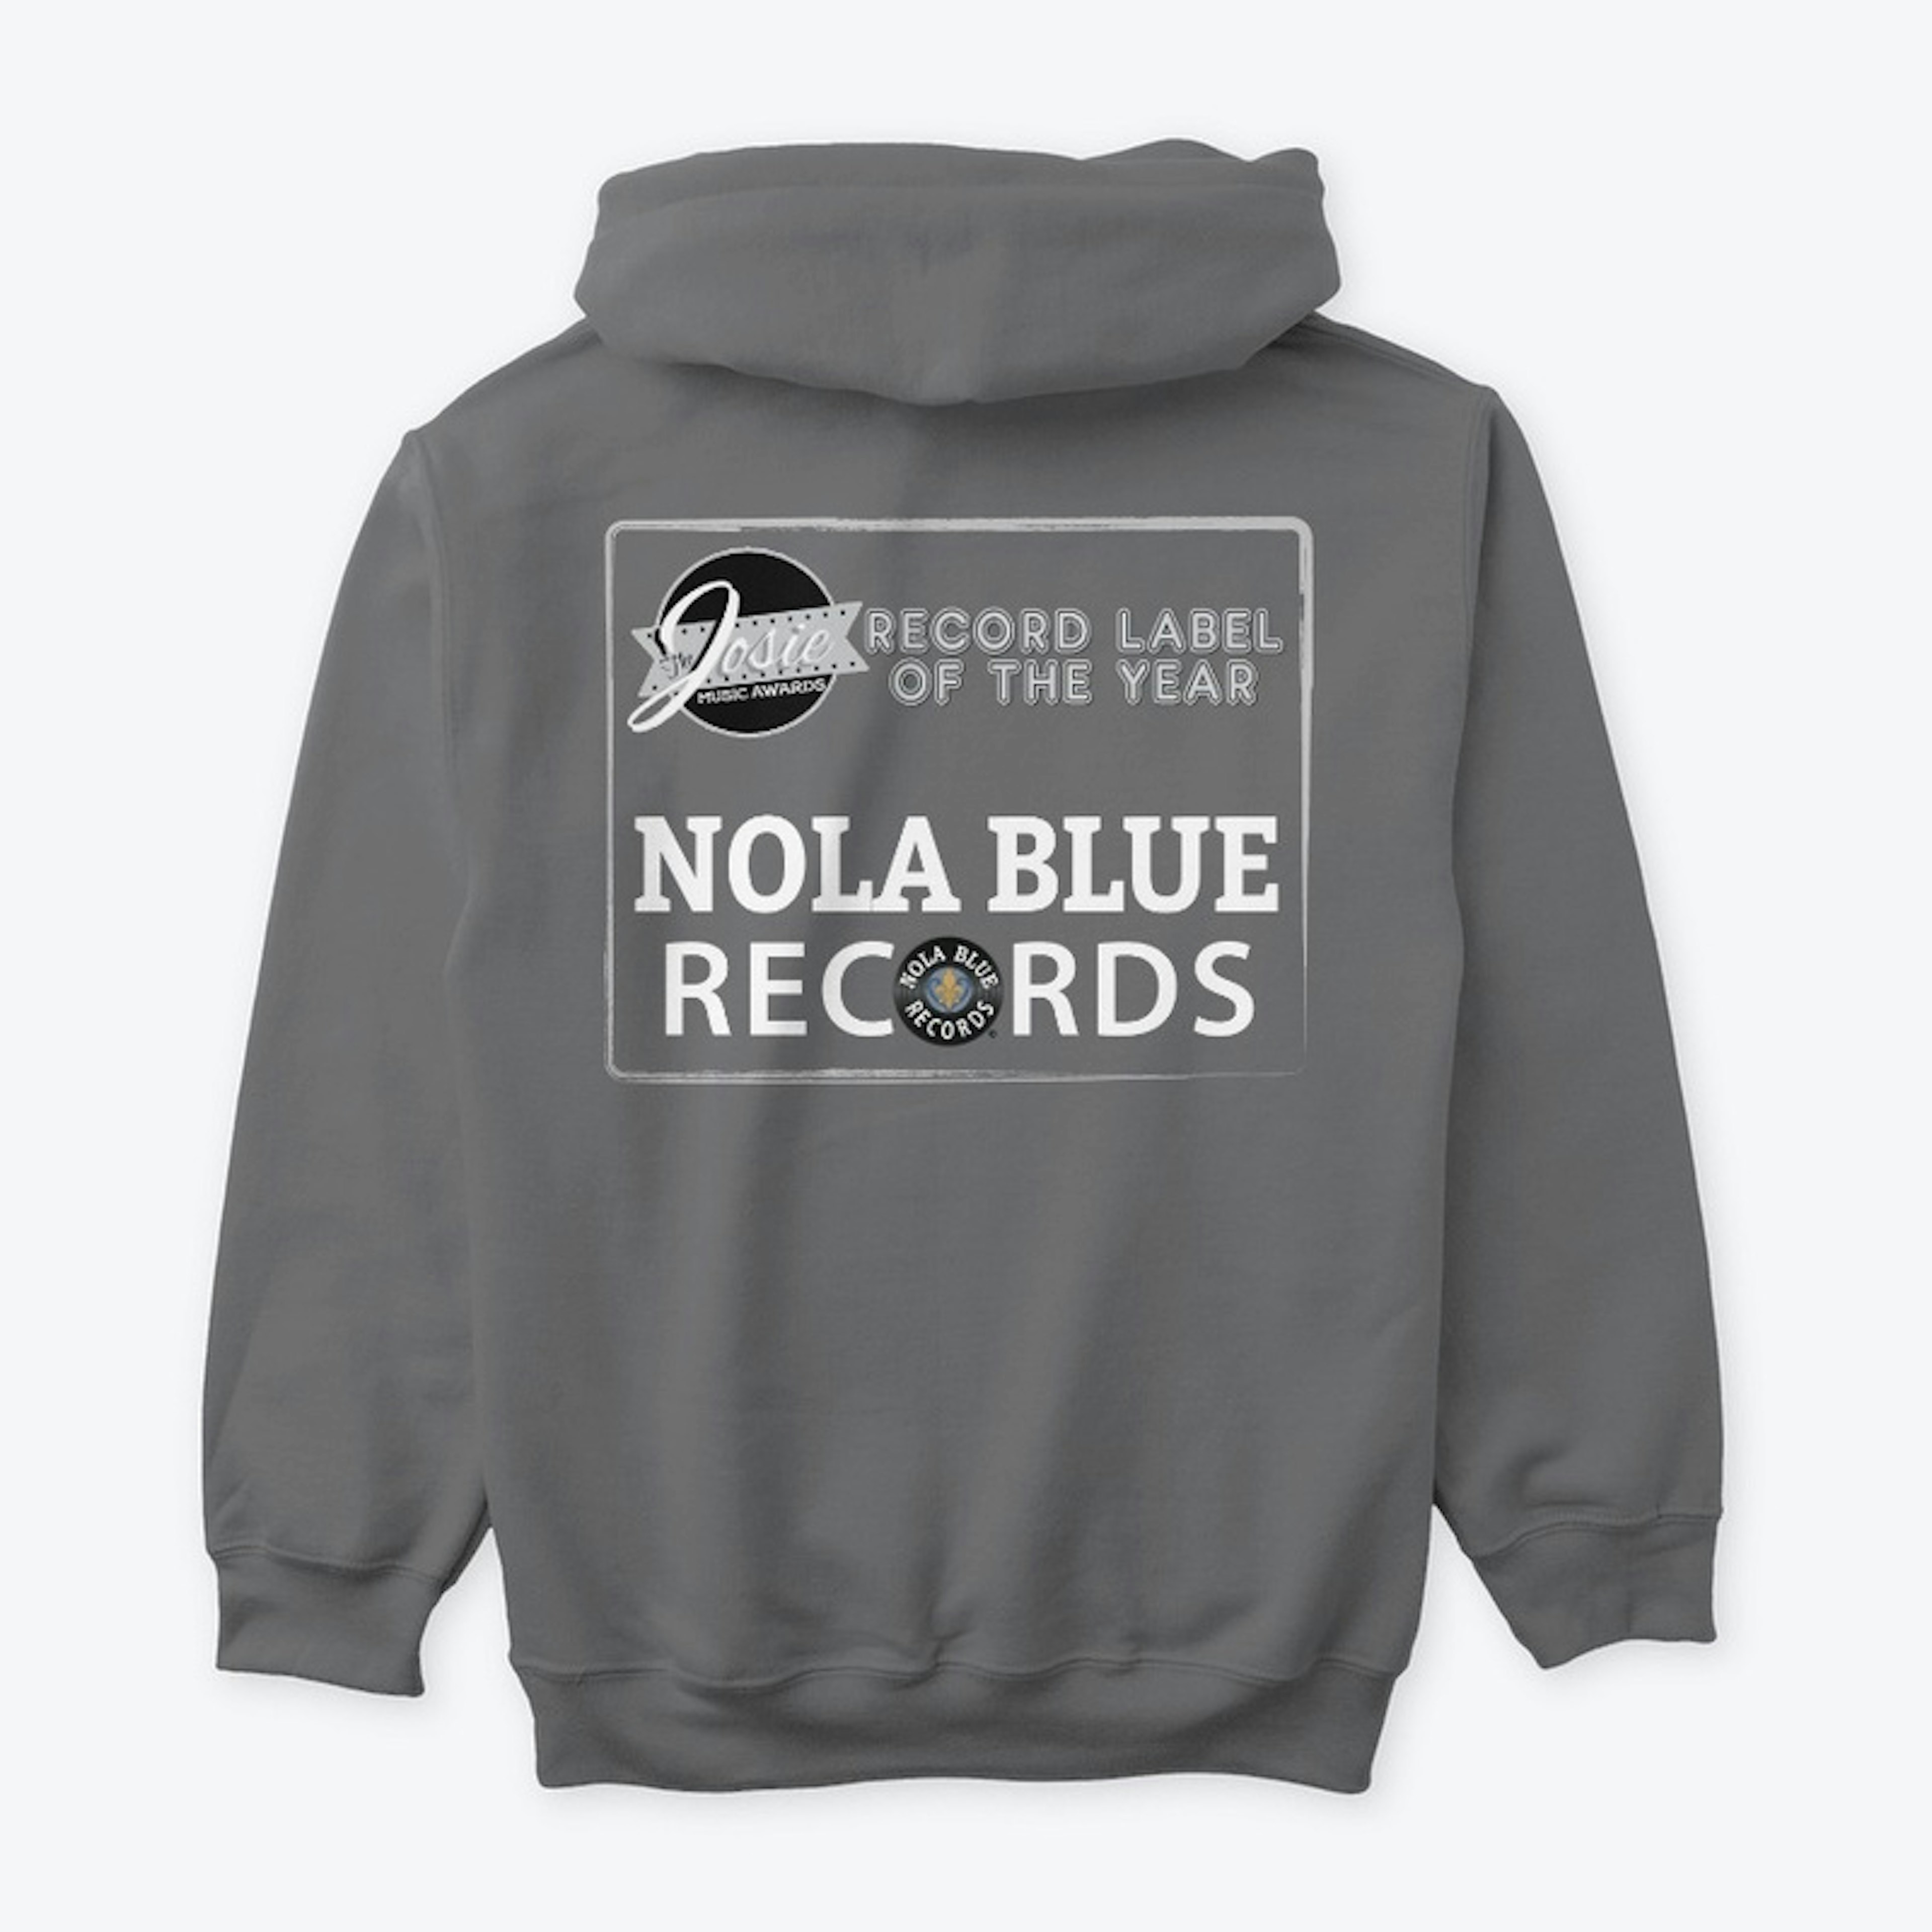 NB "Record Label of the Year" Hoodie